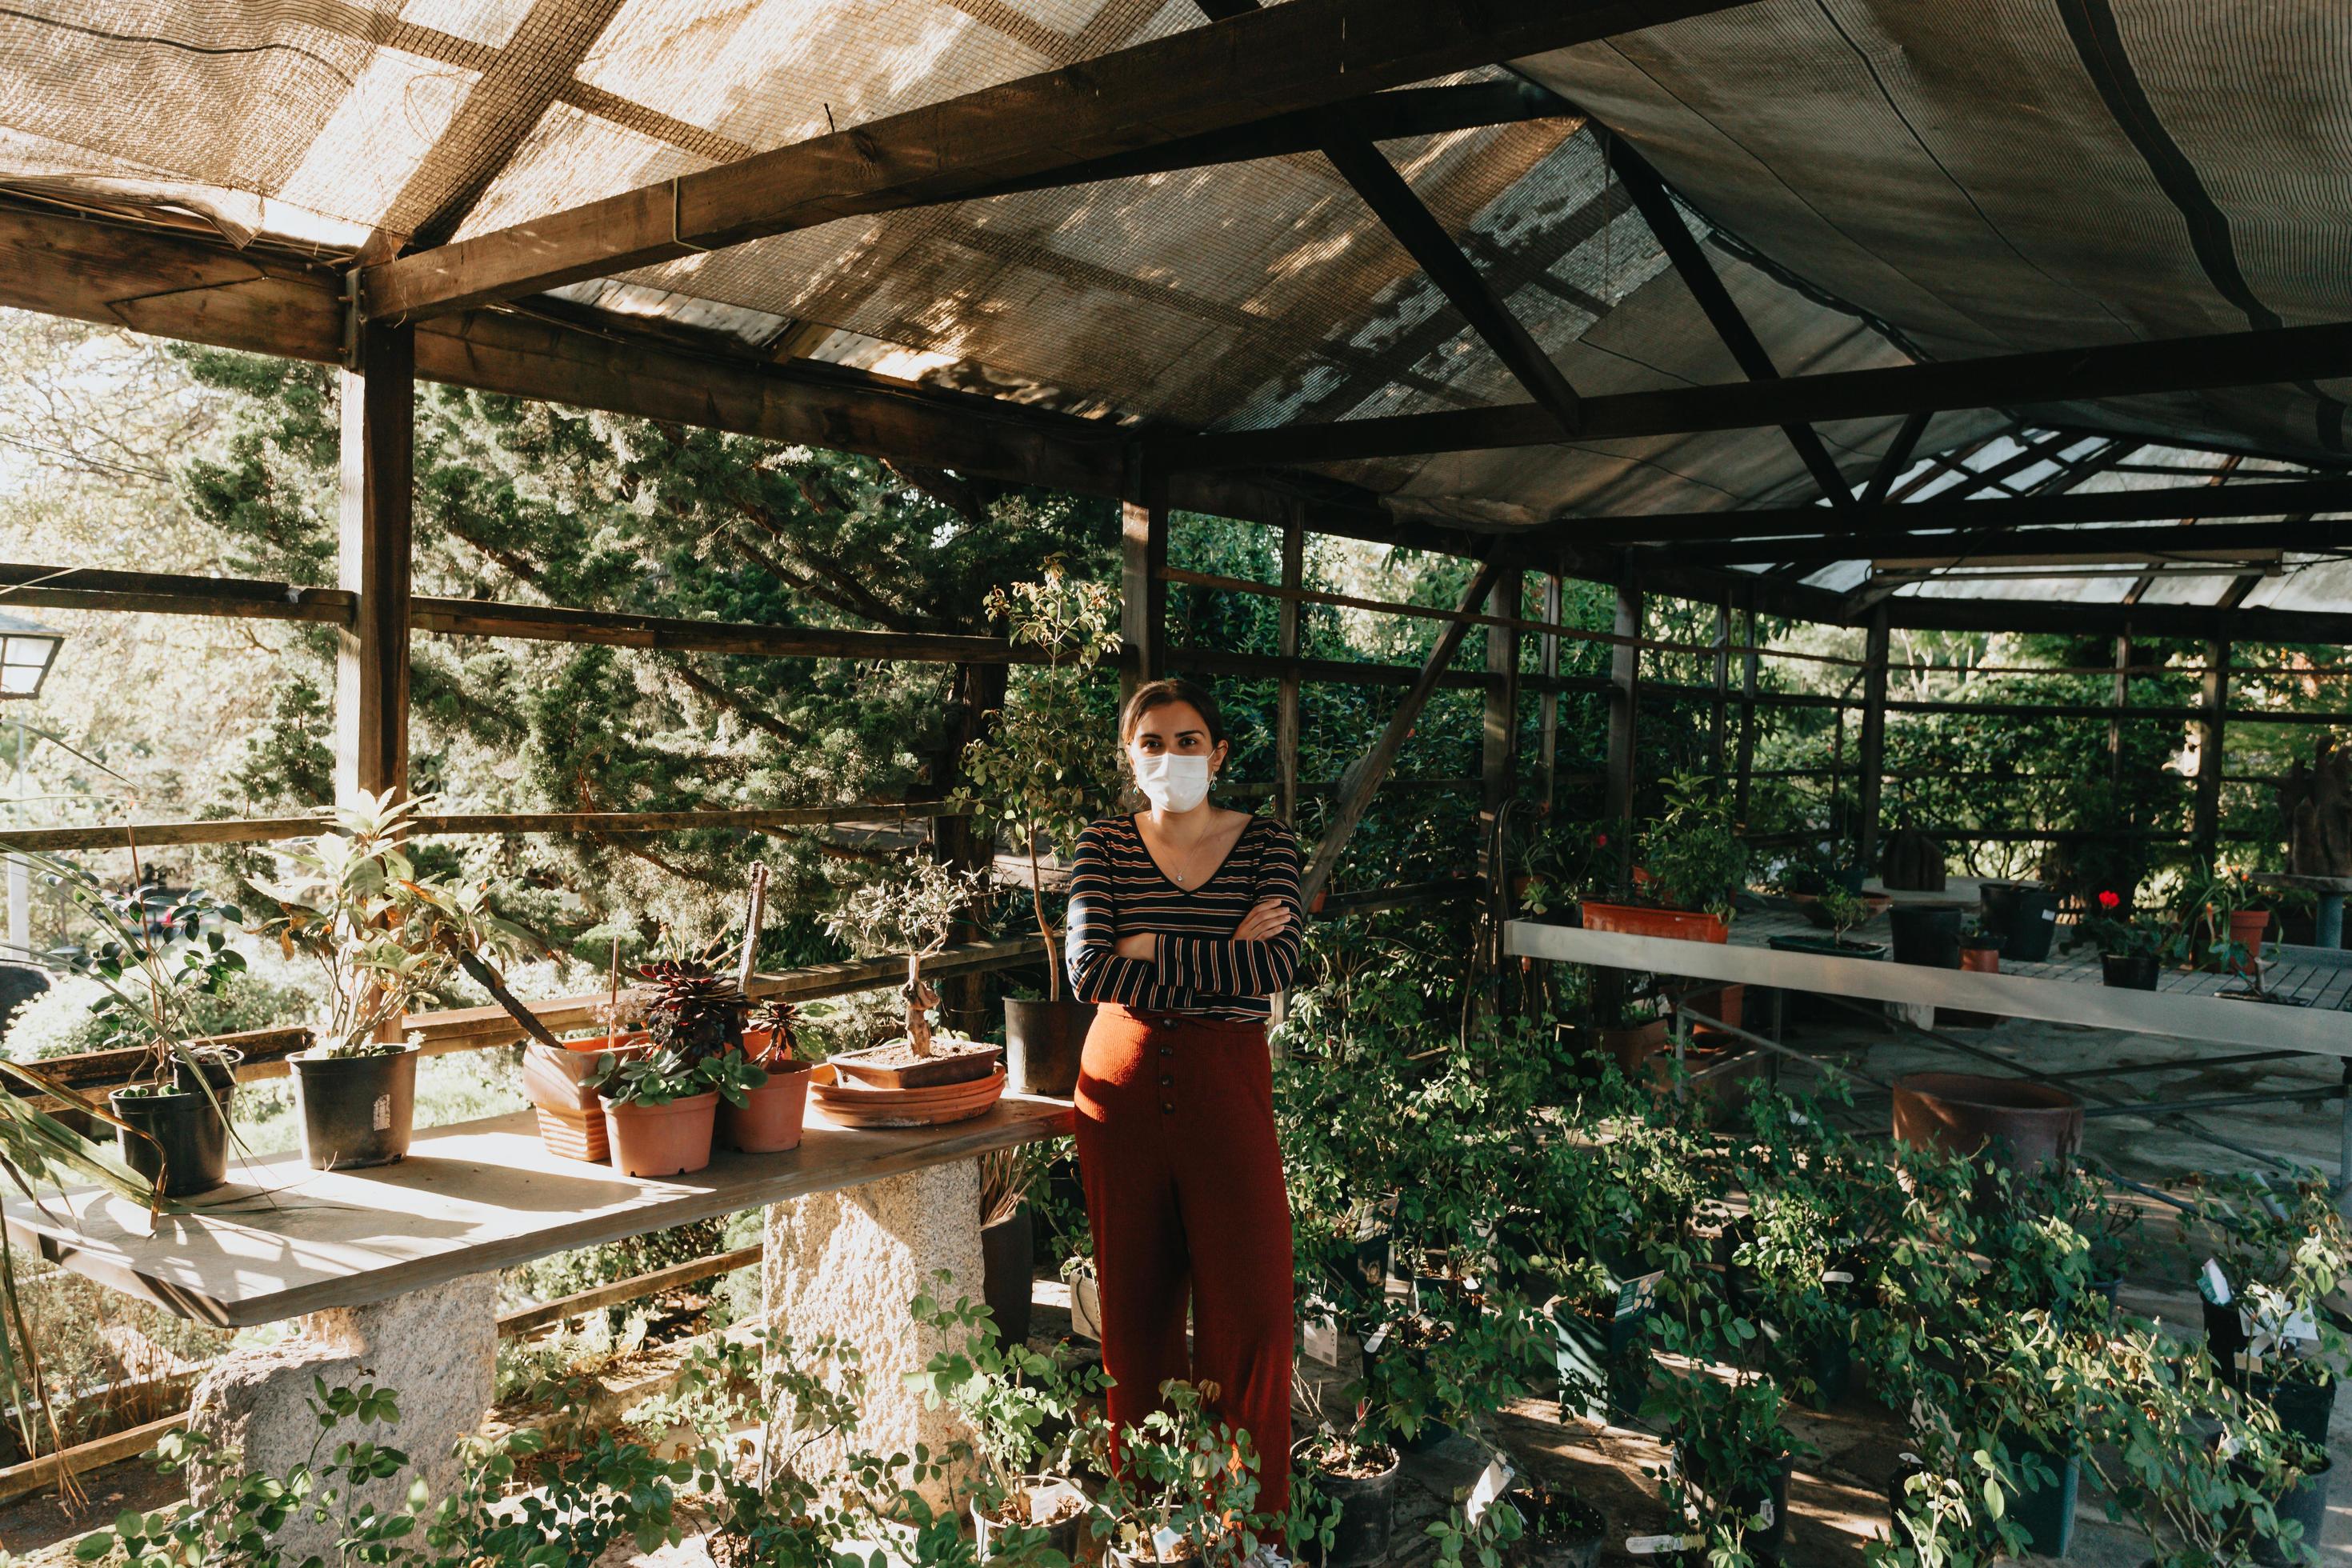 A woman wearing a mask doing some gardening photo